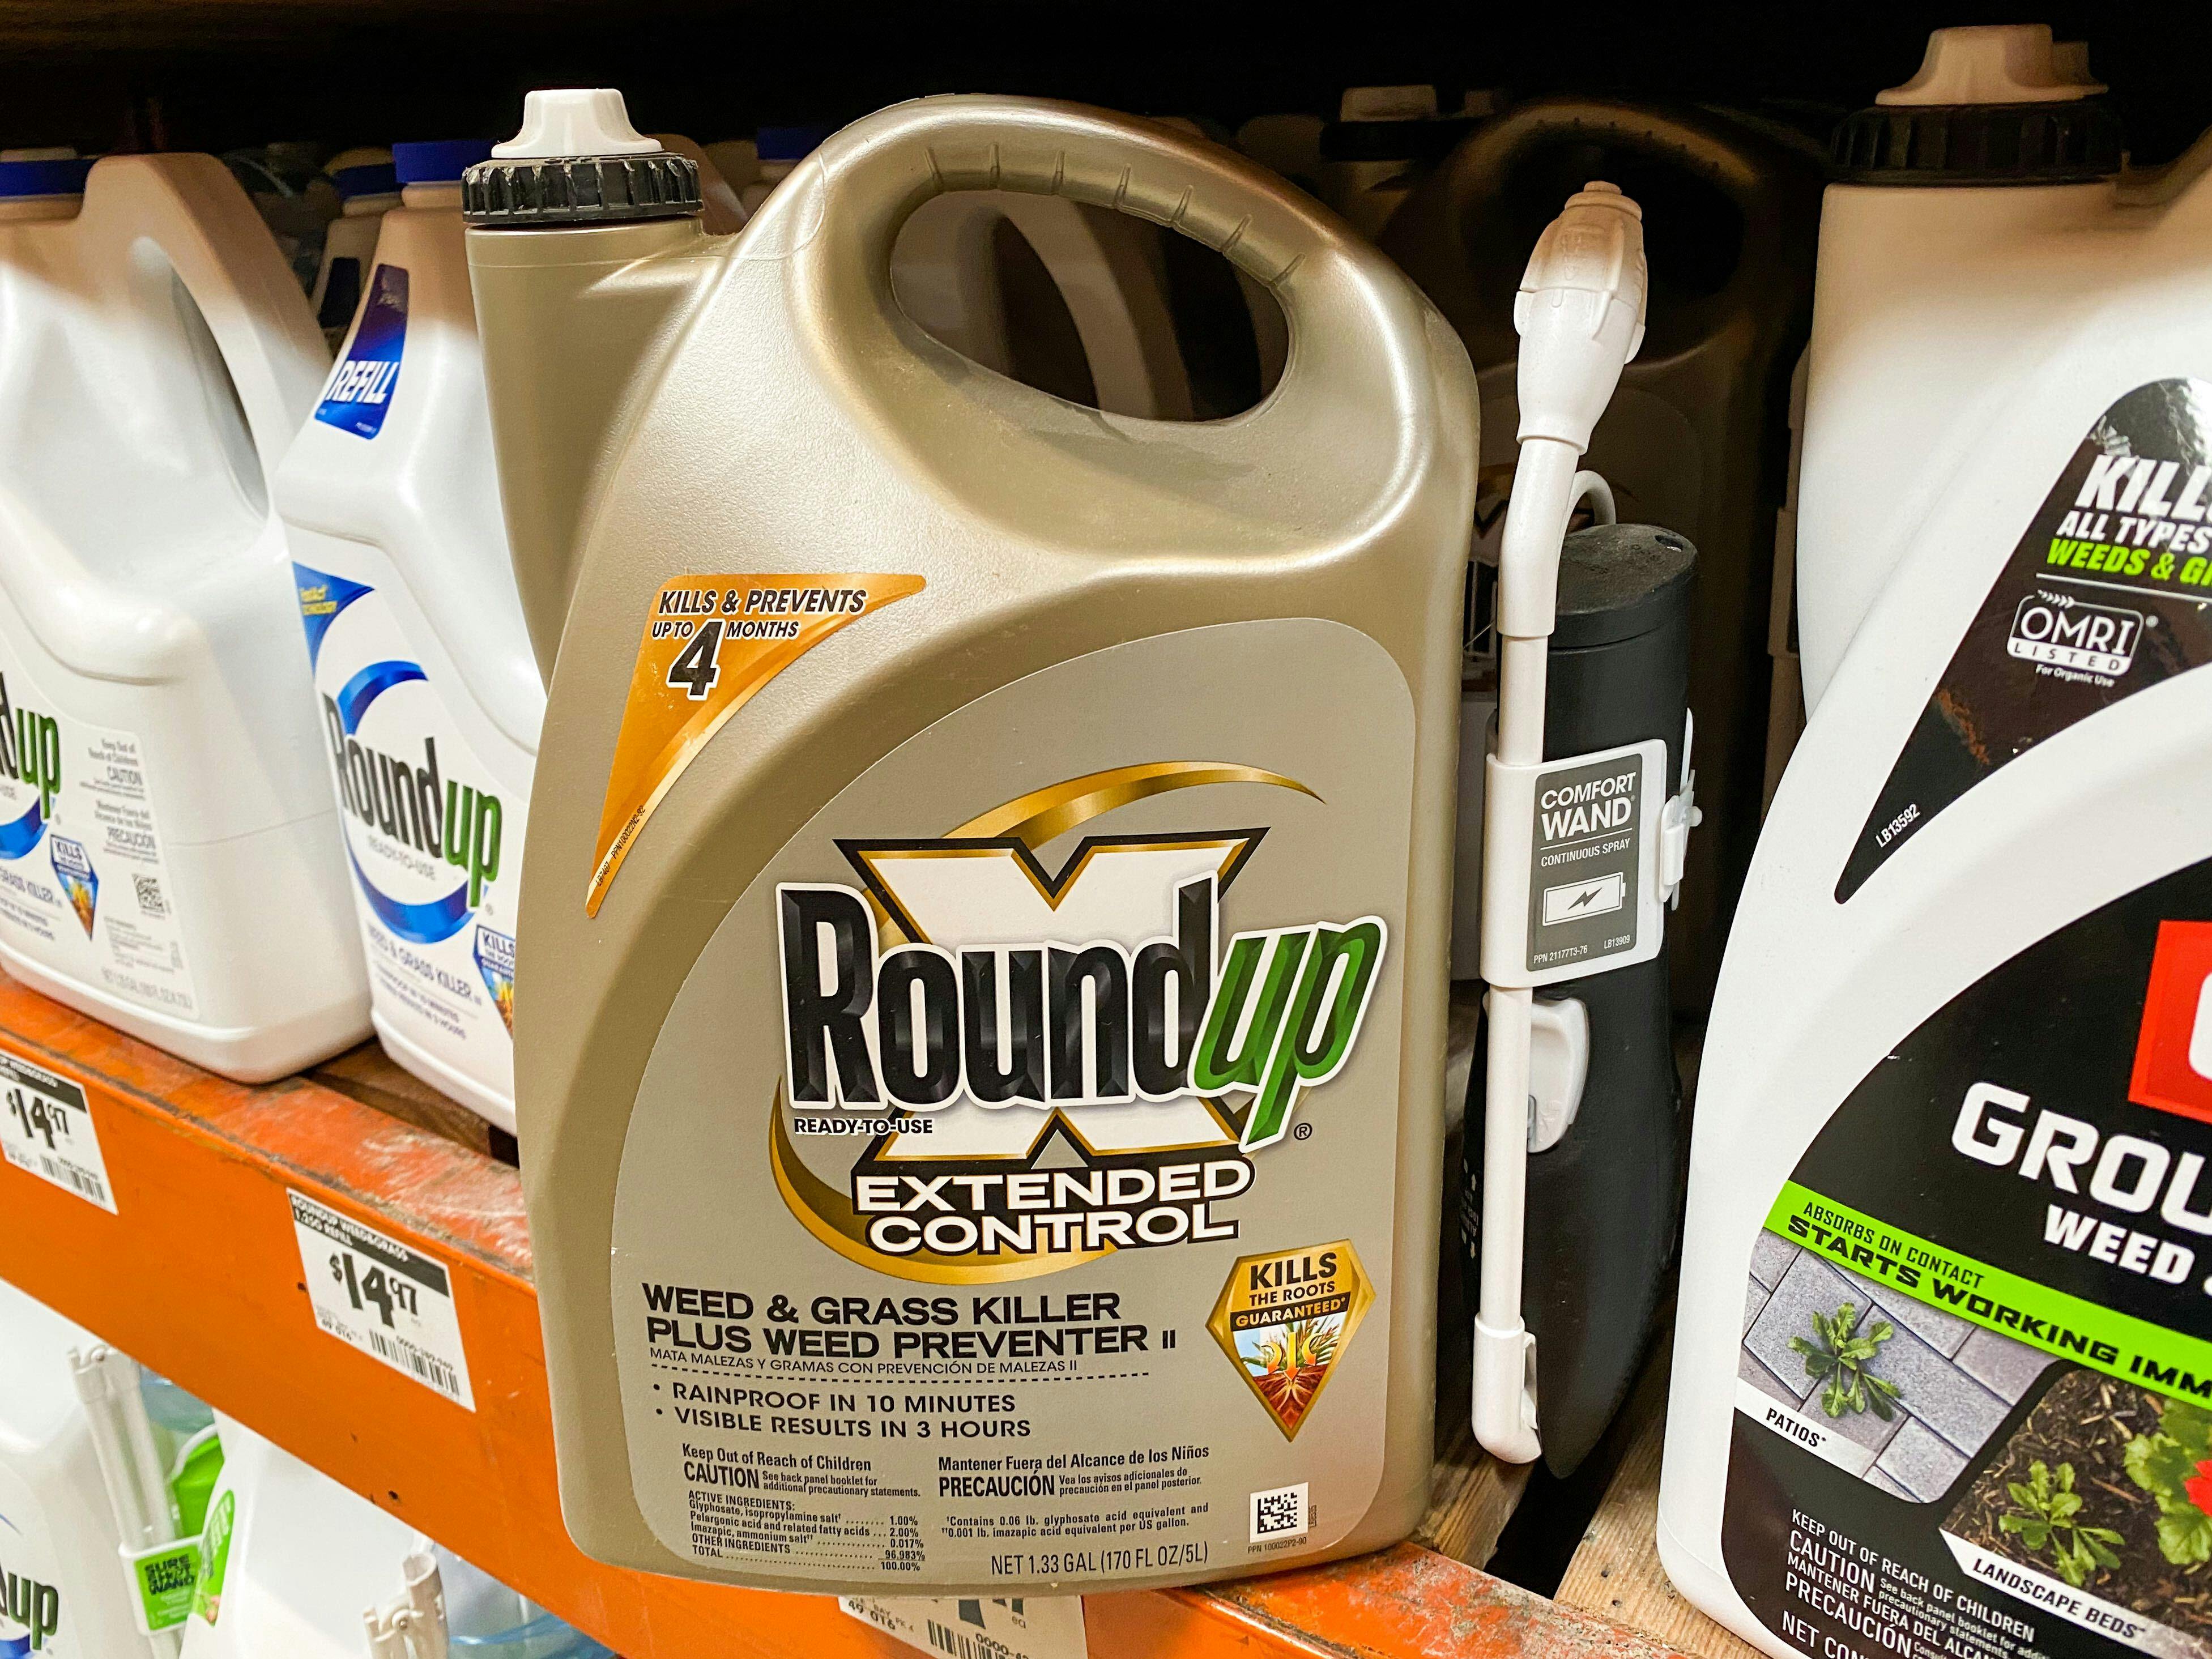 A bottle of RoundUp weed killer refill on the shelf at home depot